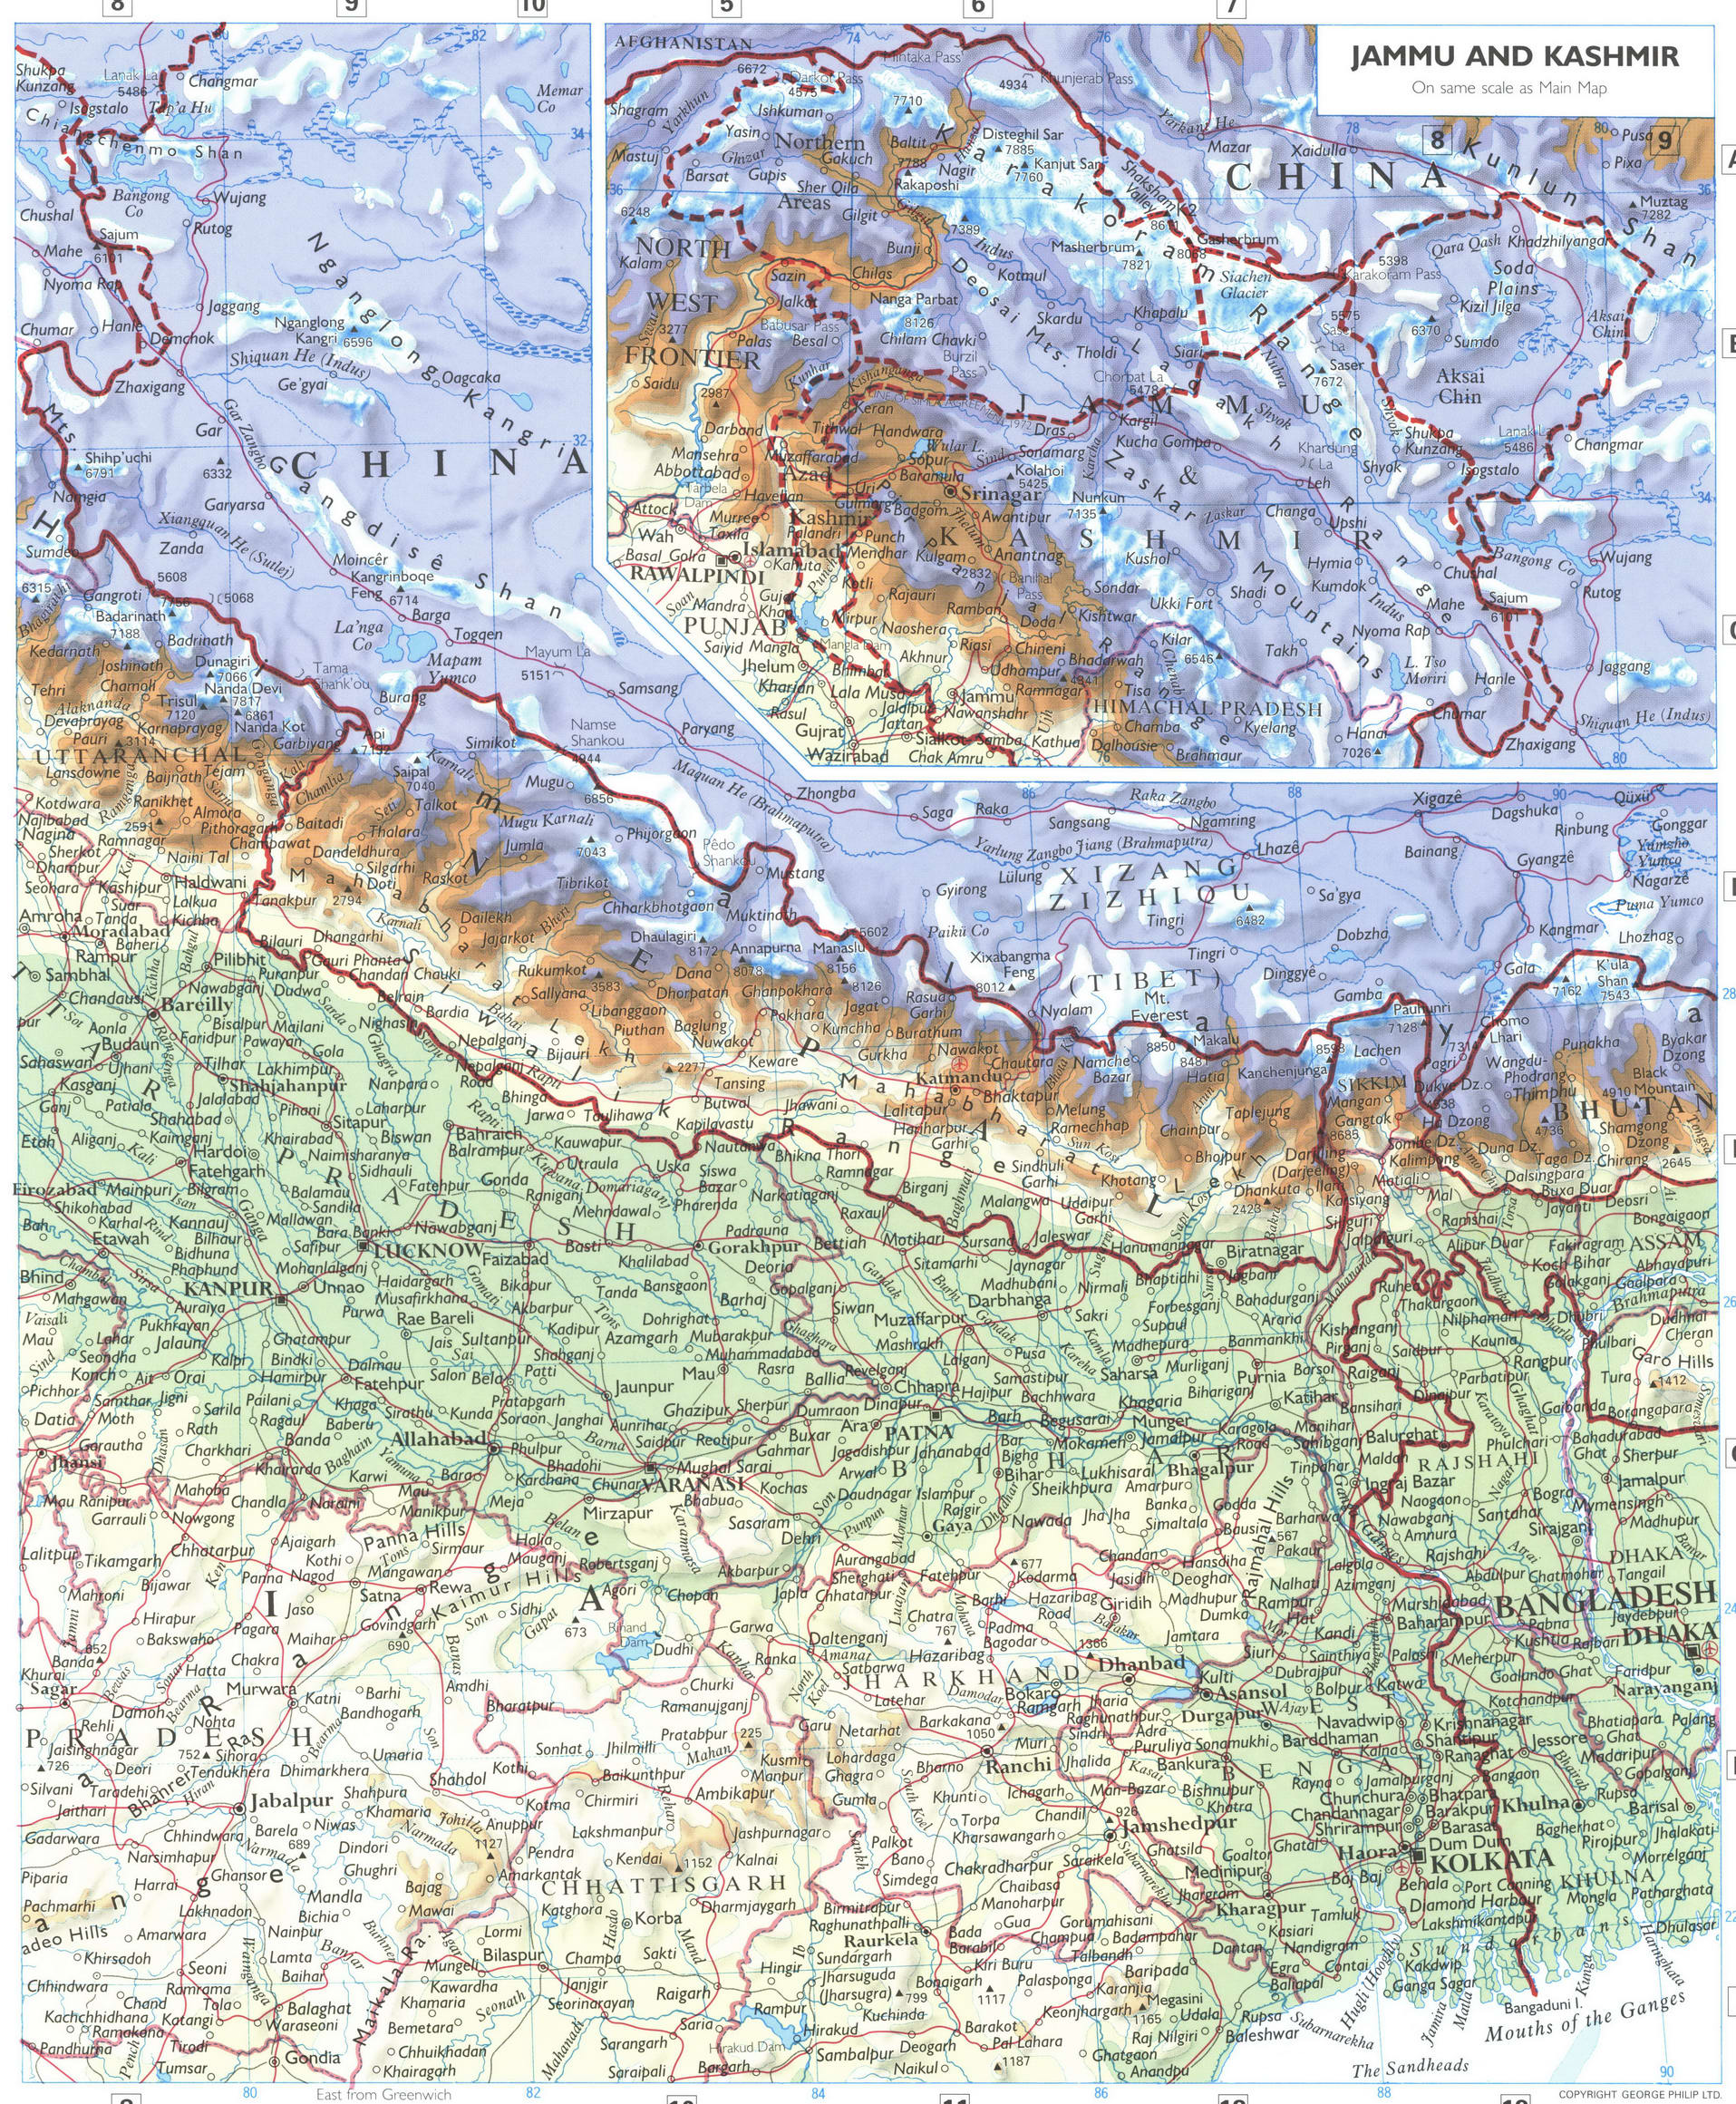 Map of The Indo-Gangetic Plain